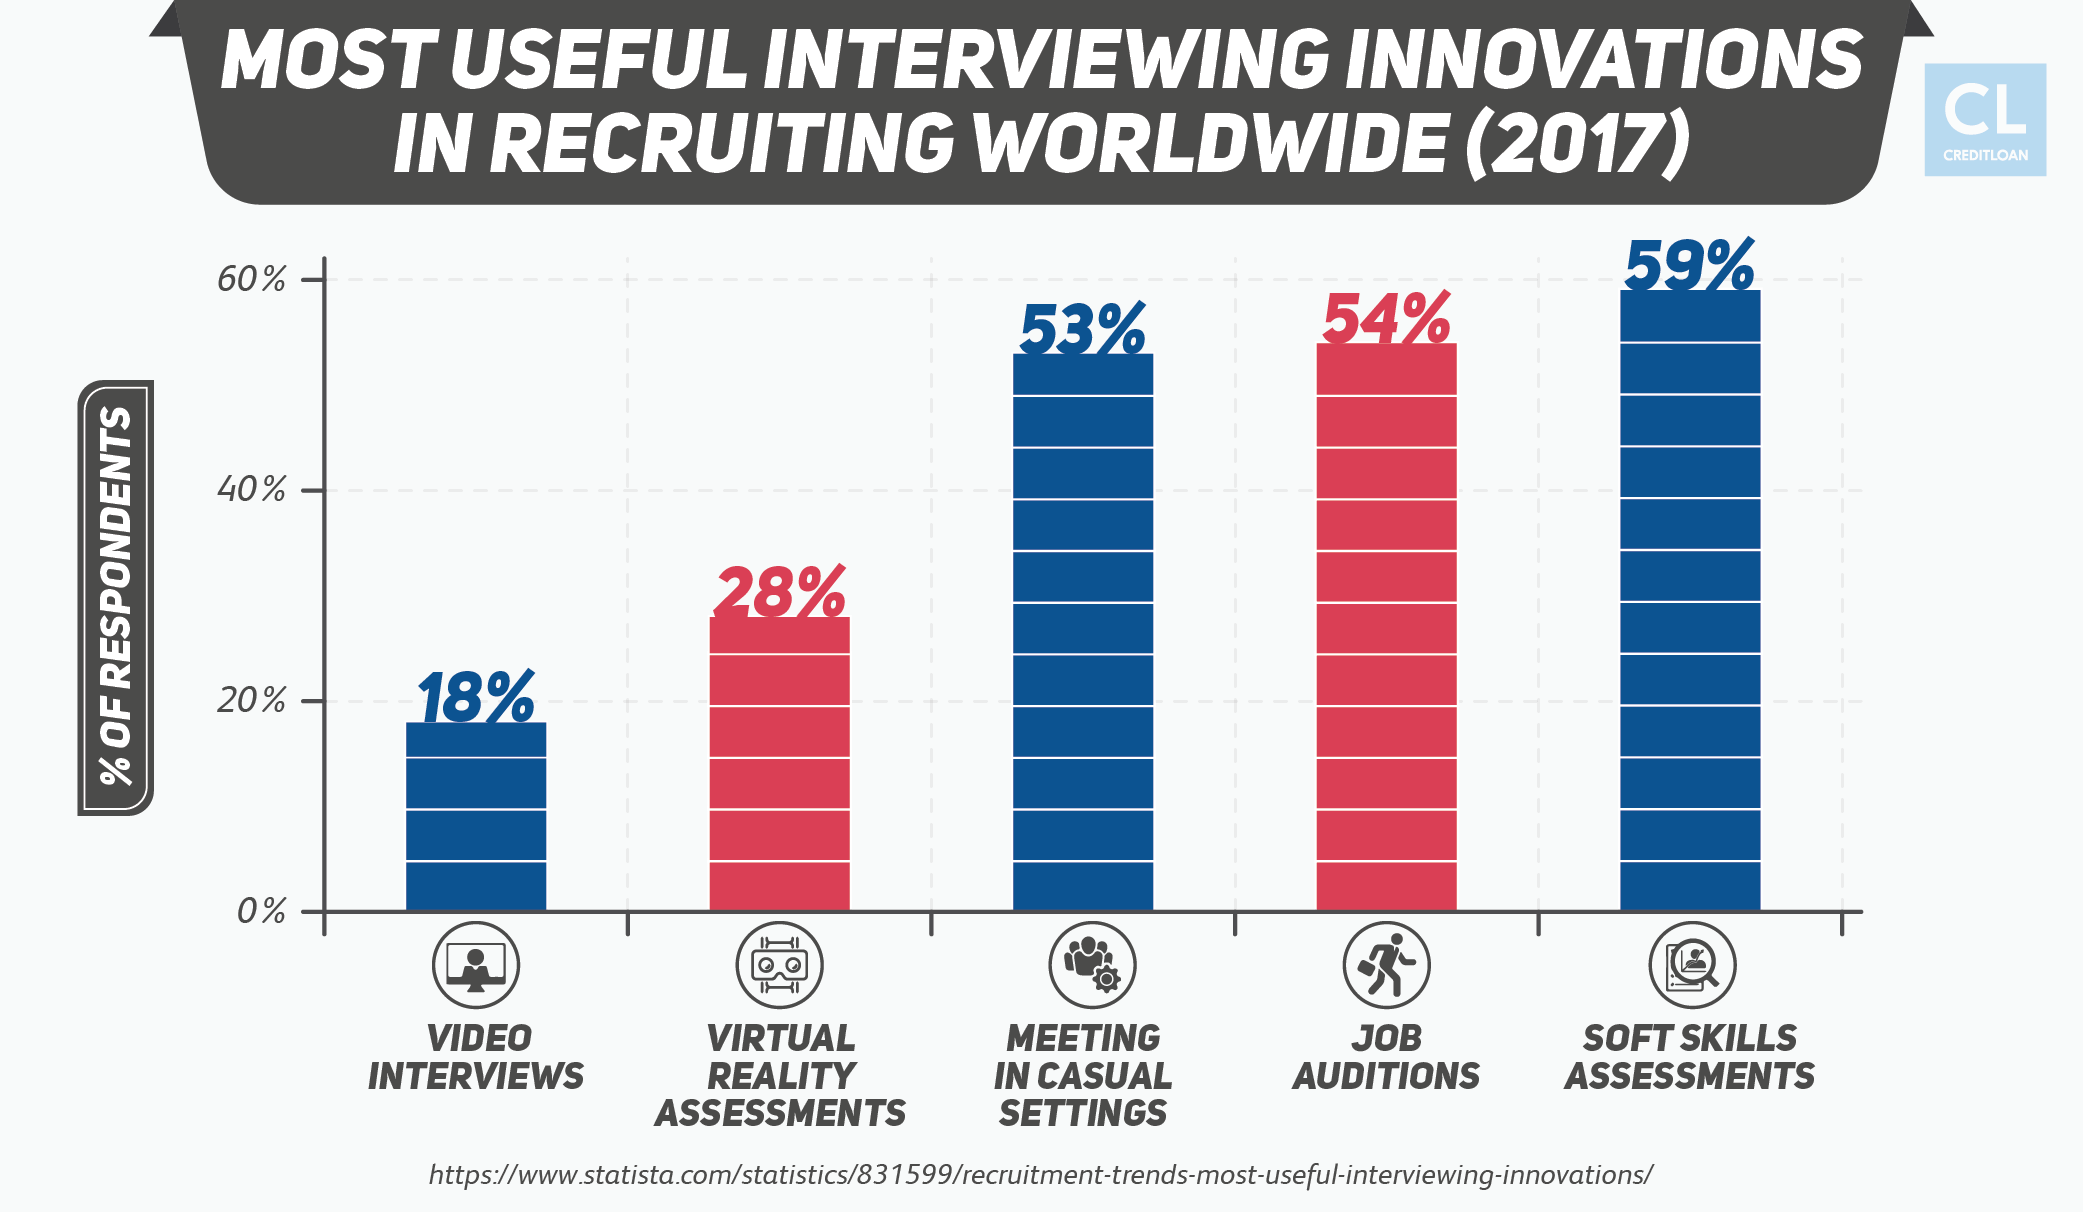 Most Useful Interviewing Innovations in Recruiting Worldwide